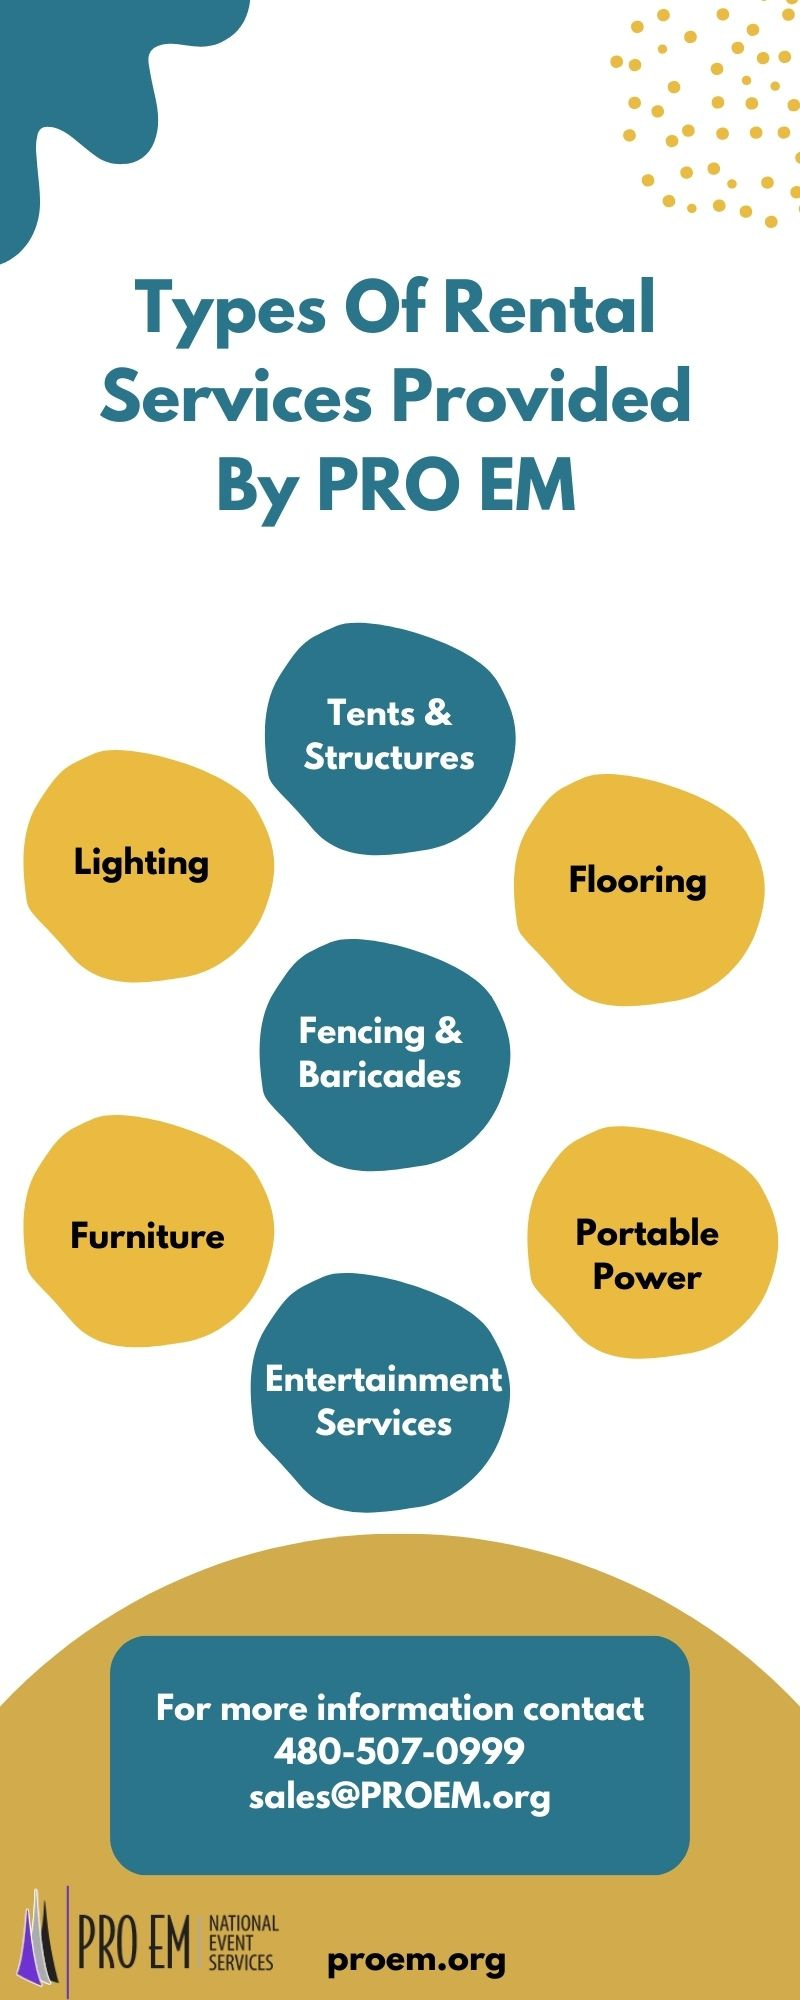 Types of Rental Services Provided by PRO EM